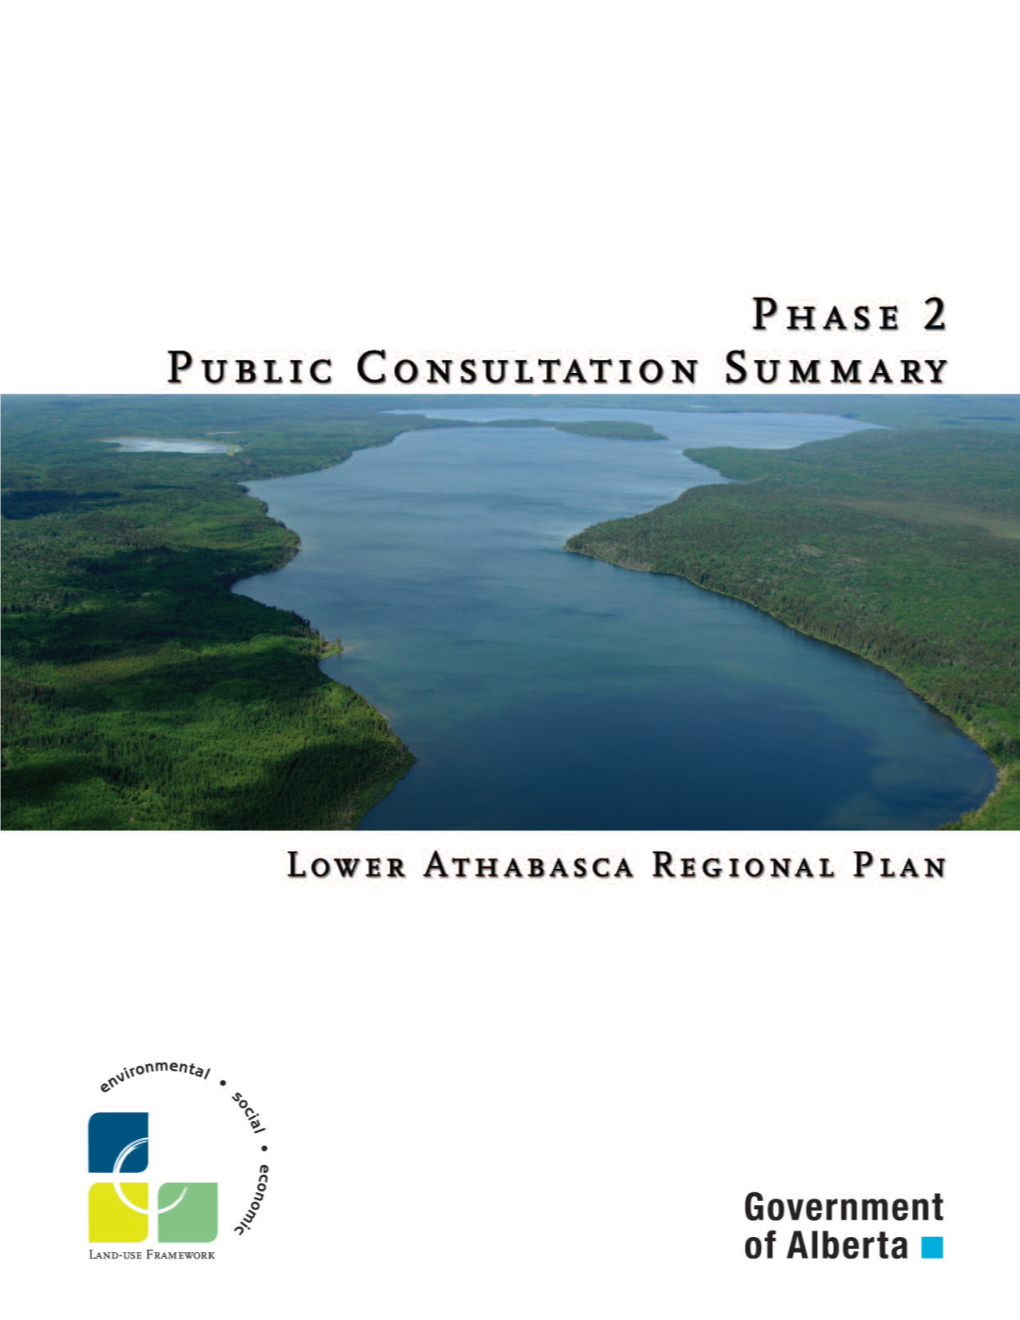 Lower Athabasca Regional Plan (LARP) As an Immediate Priority